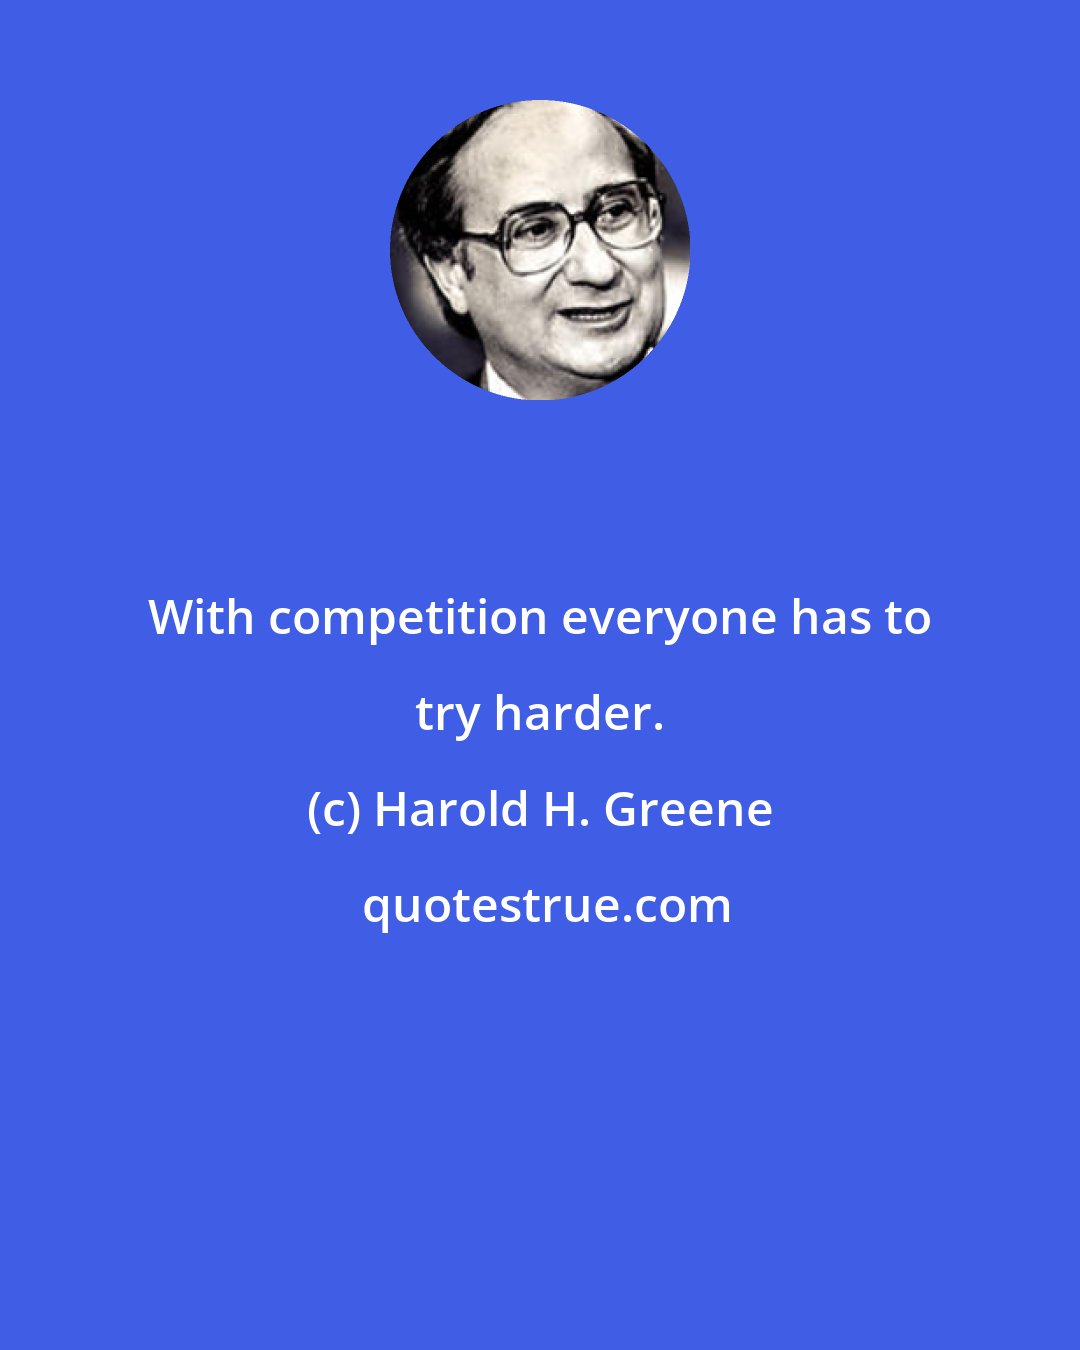 Harold H. Greene: With competition everyone has to try harder.